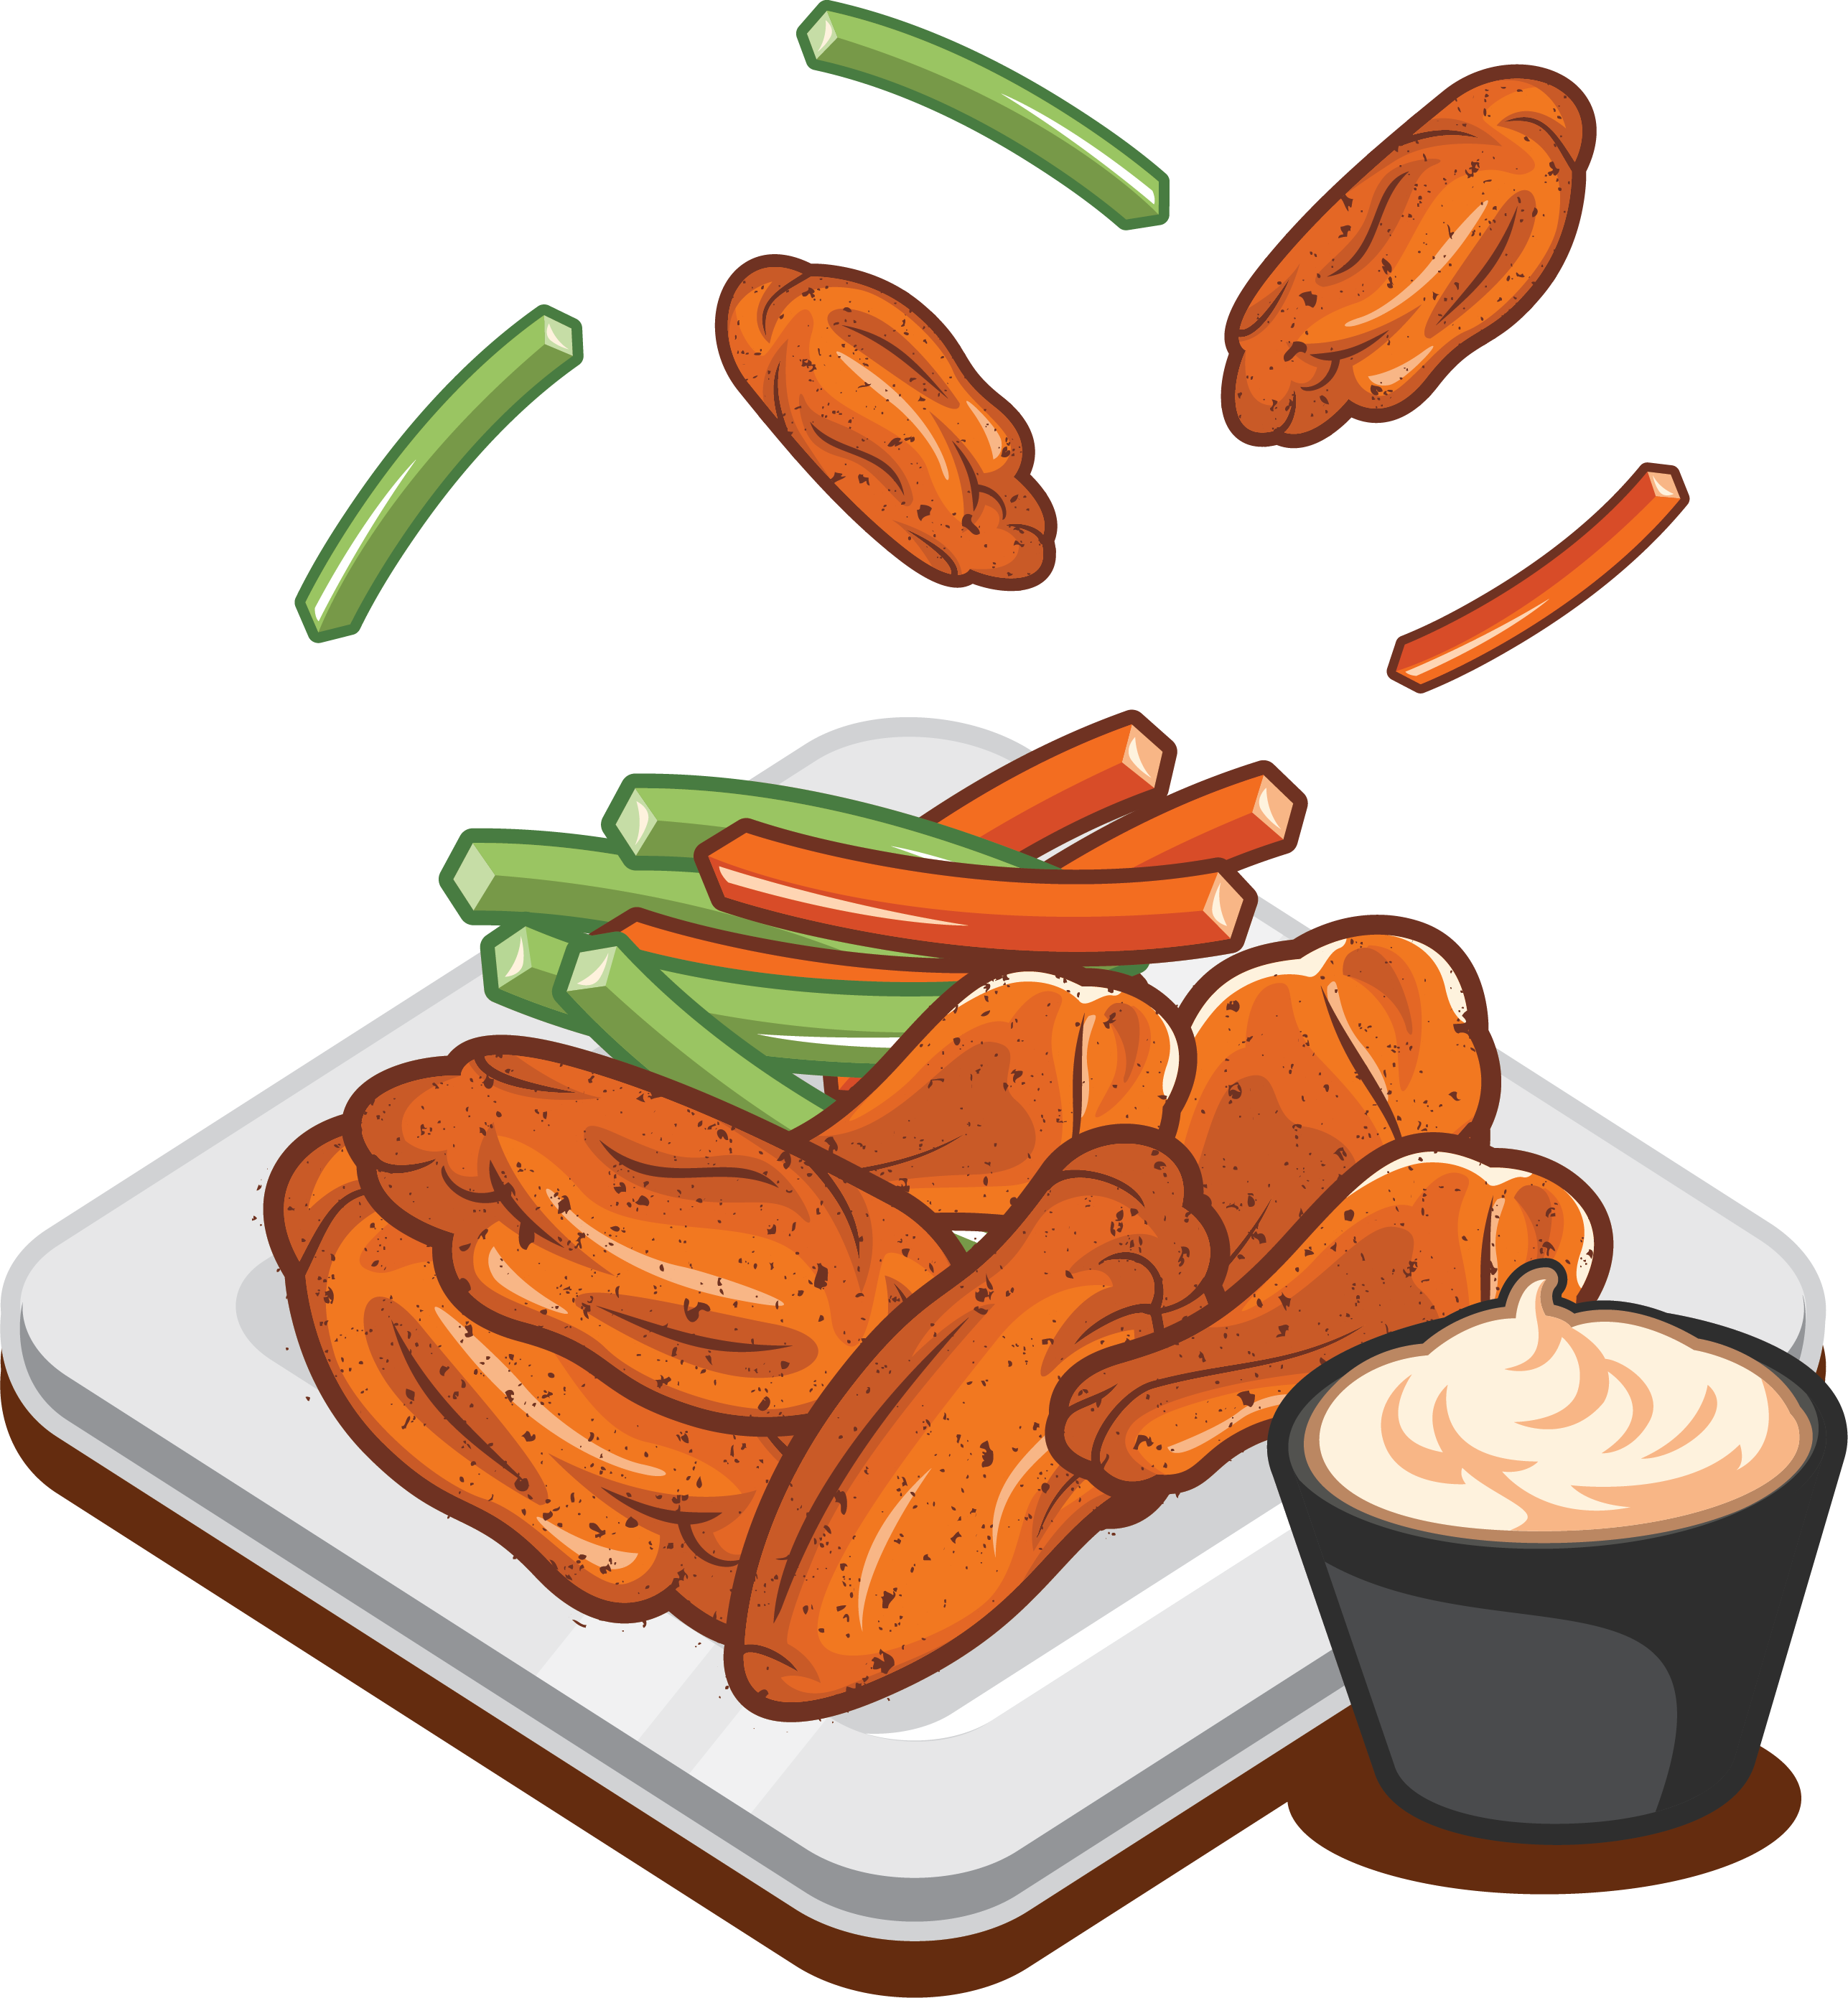 Fries clipart painting. Buffalo wing sausage fried